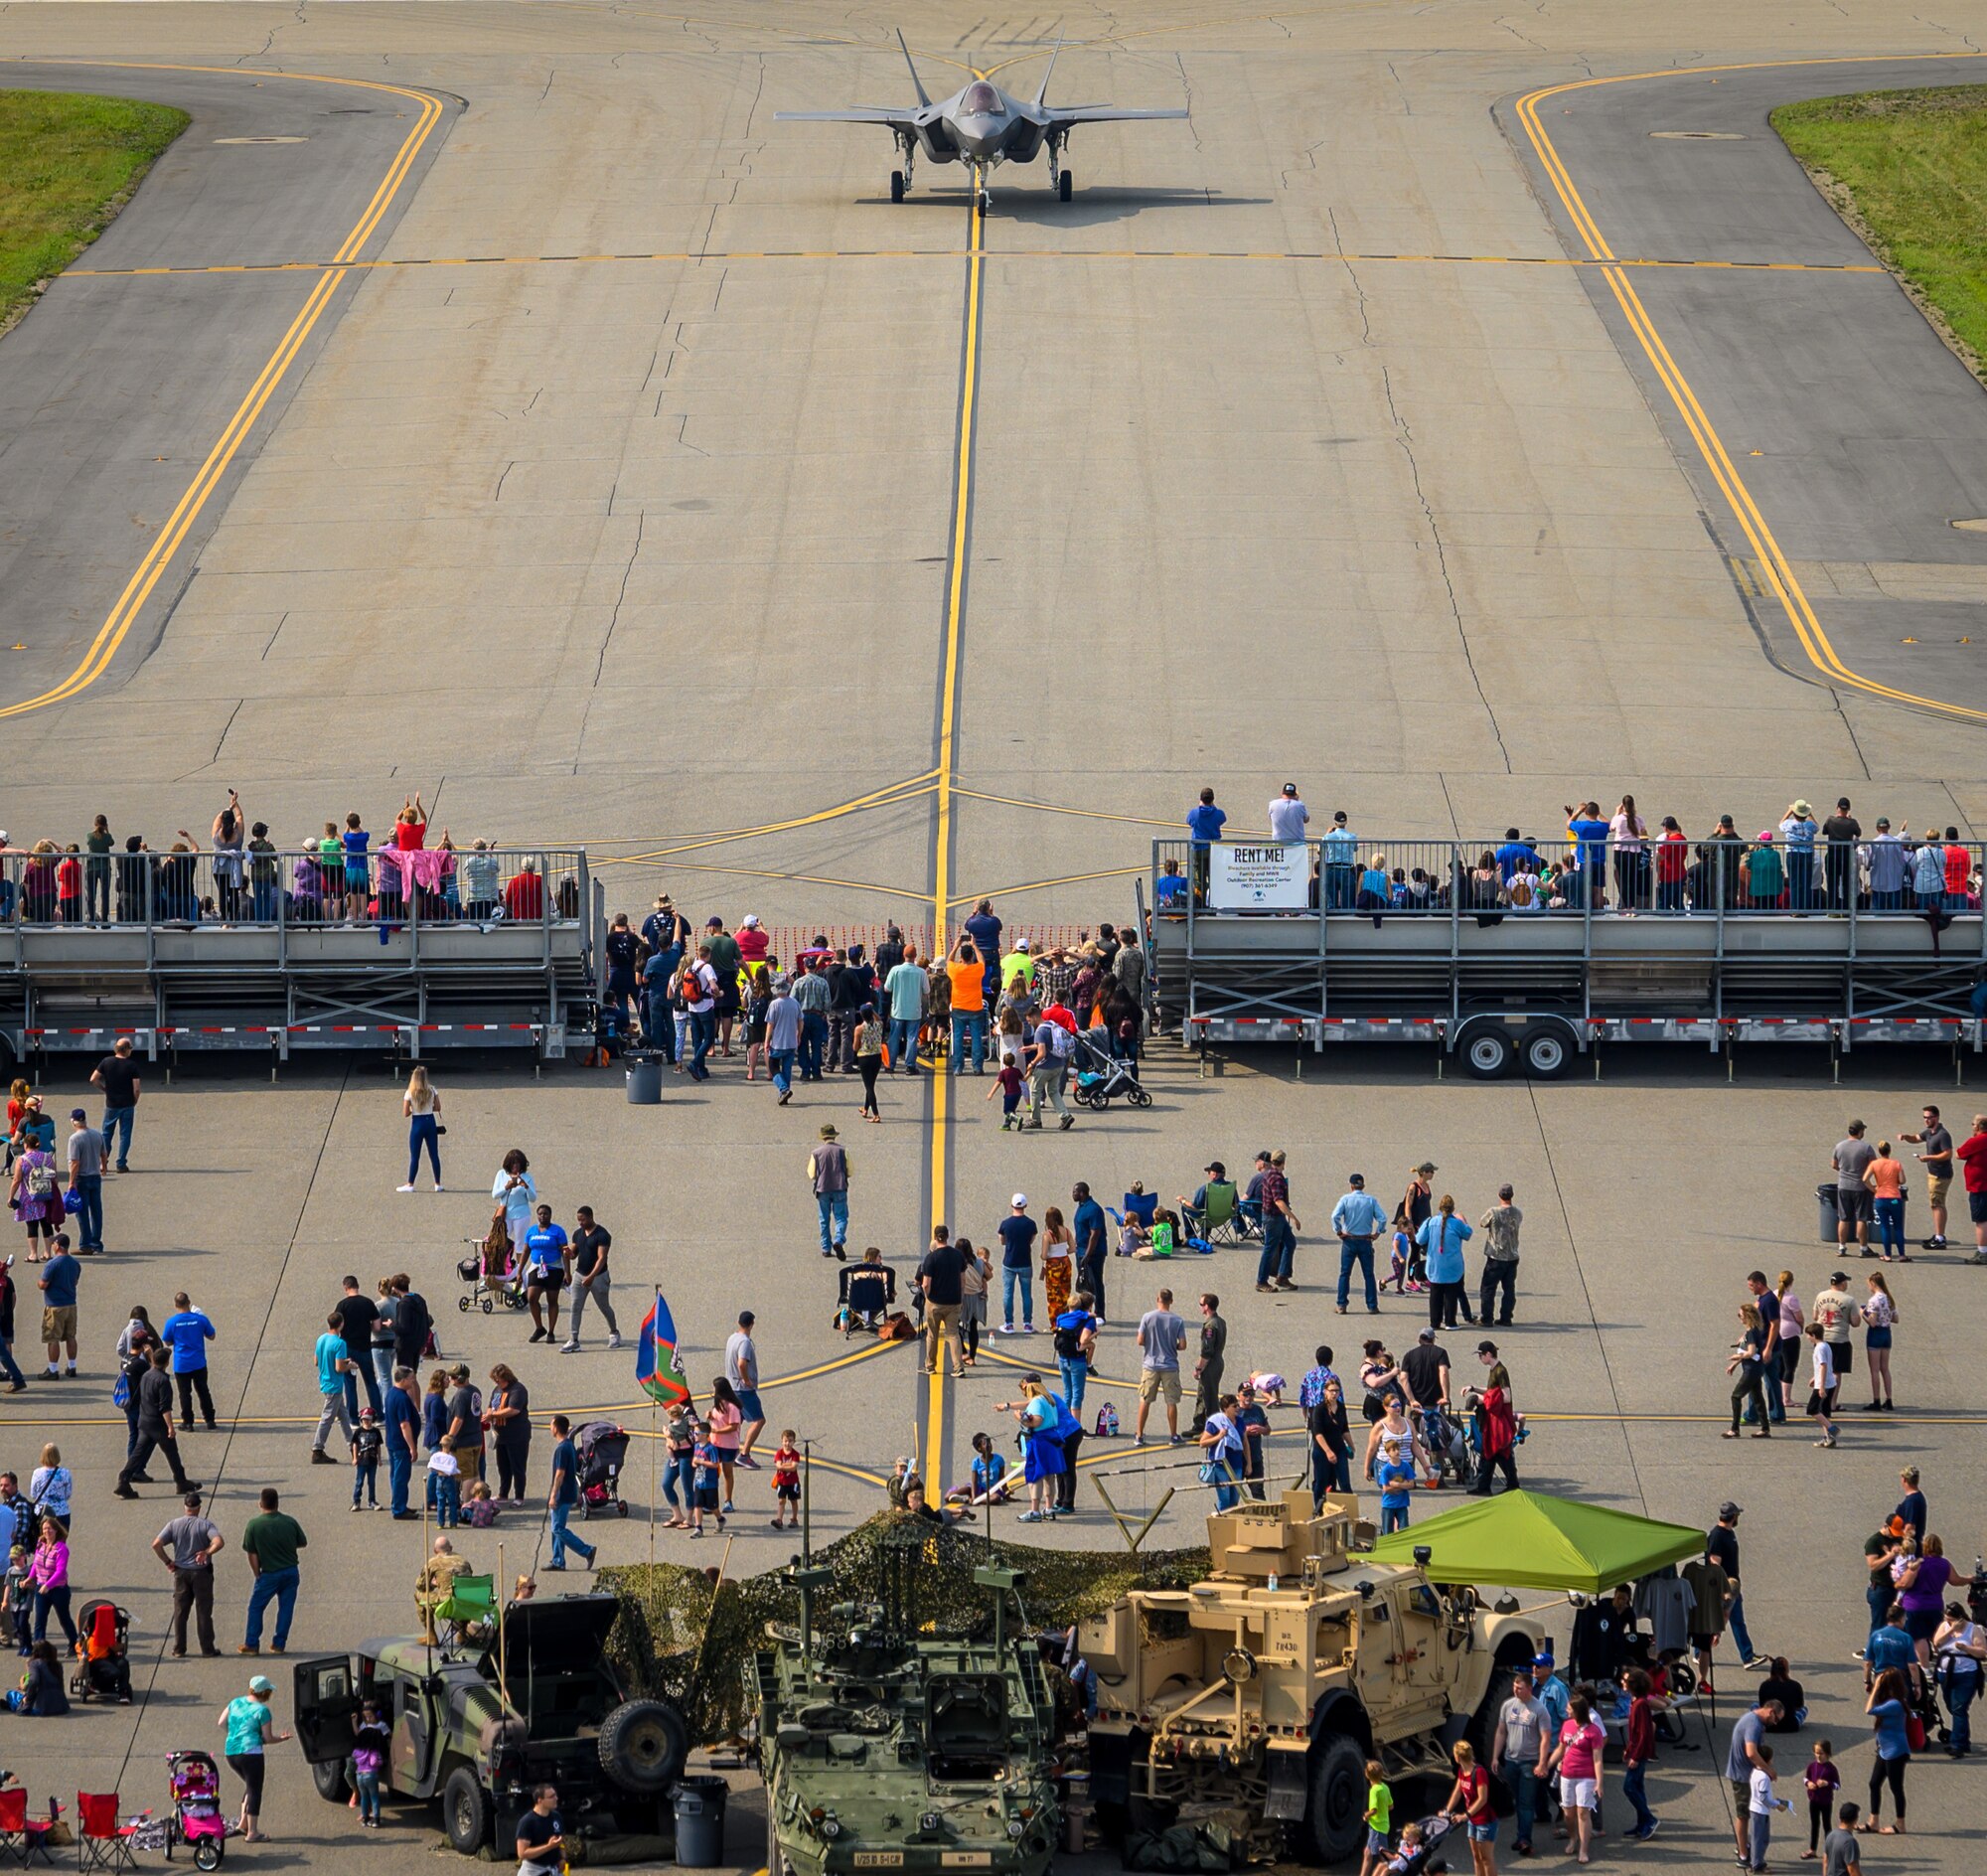 Airshow guests watch an F-35A Lightning II taxi down the runway following an aerial performance during the Arctic Lightning Airshow July 13, 2019, at Eielson Air Force Base, Alaska. Spectators got an up-close look at the Air Force’s newest fighter jet marking the airshow since 2008. (U.S. Air Force photo by Senior Airman Alexander Cook)